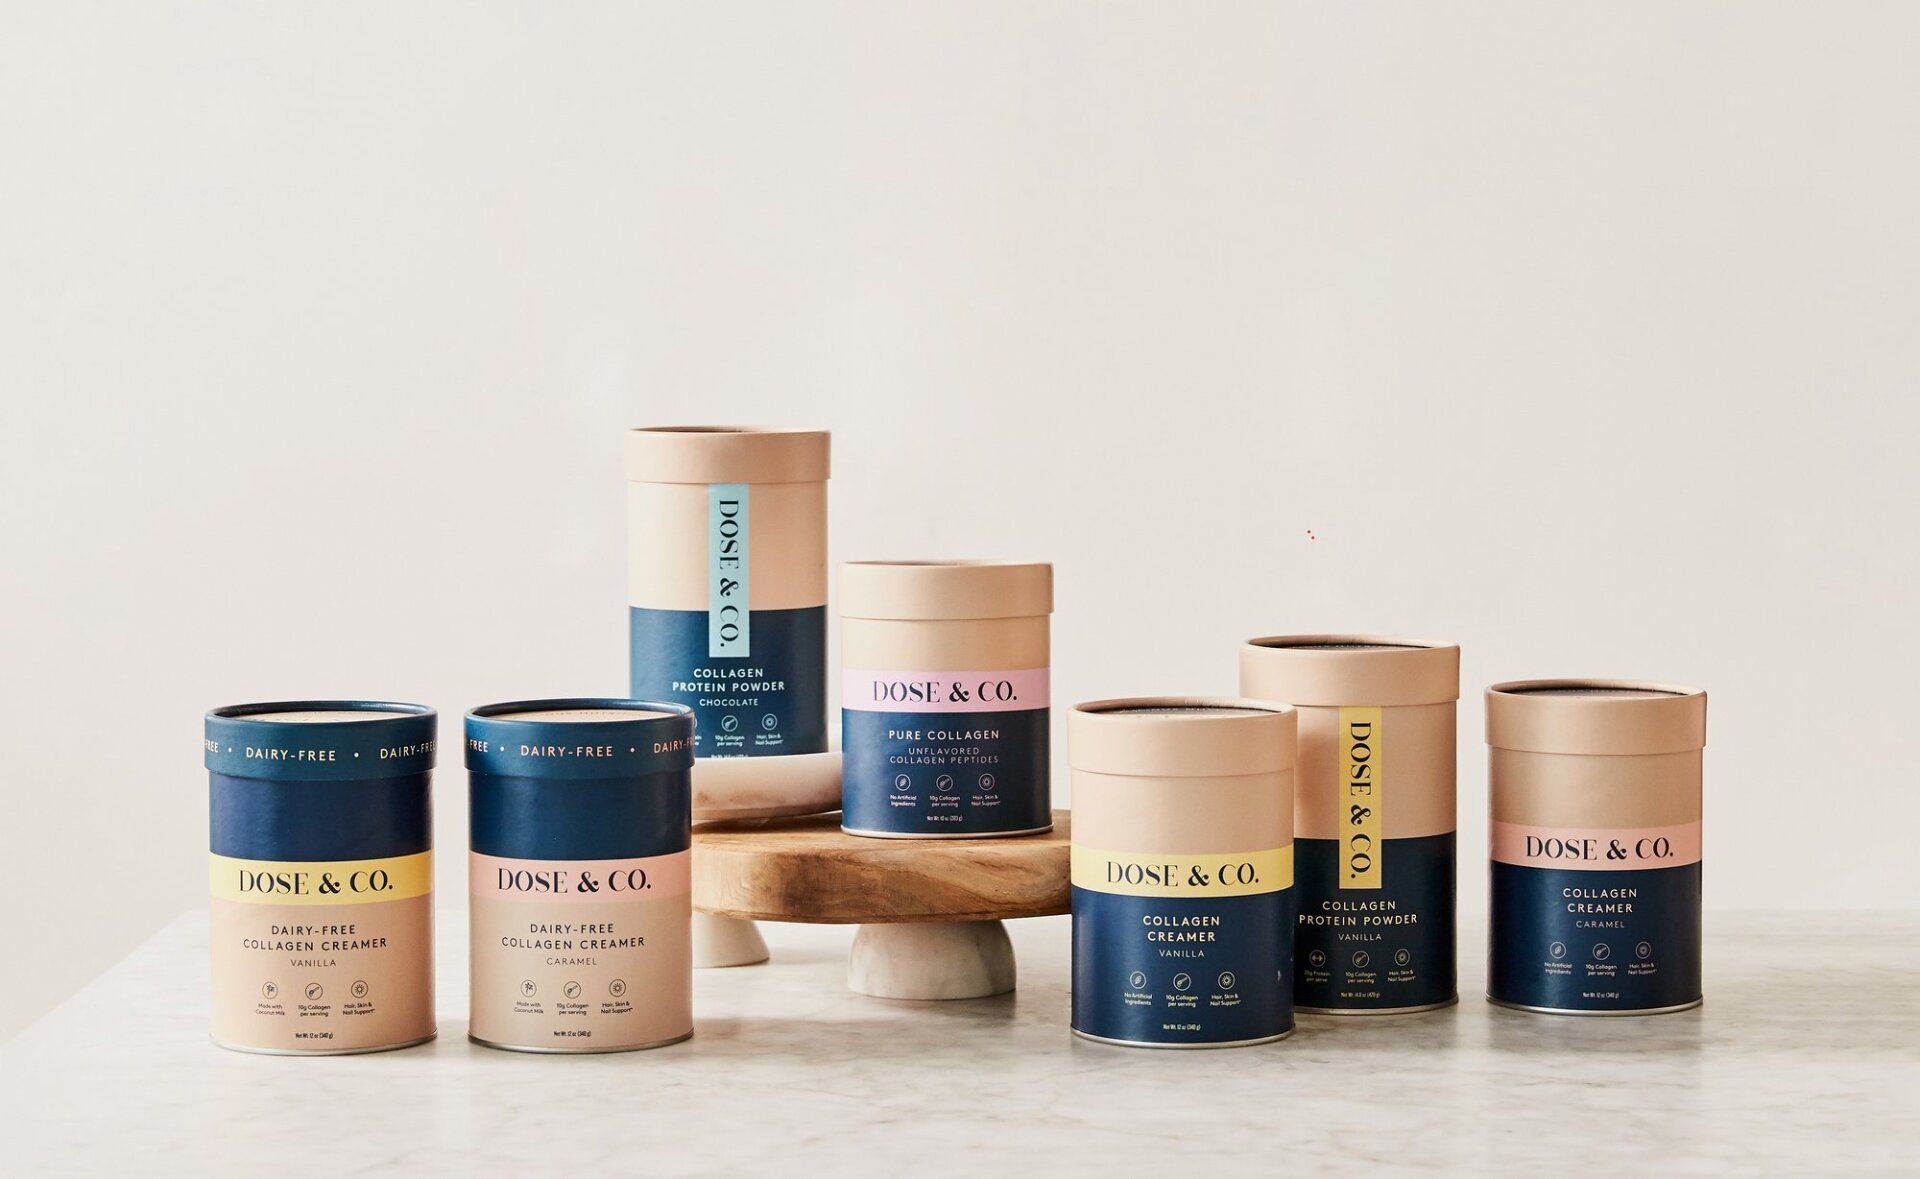 An image featuring Dose & Co's range of collagen and protein supplements